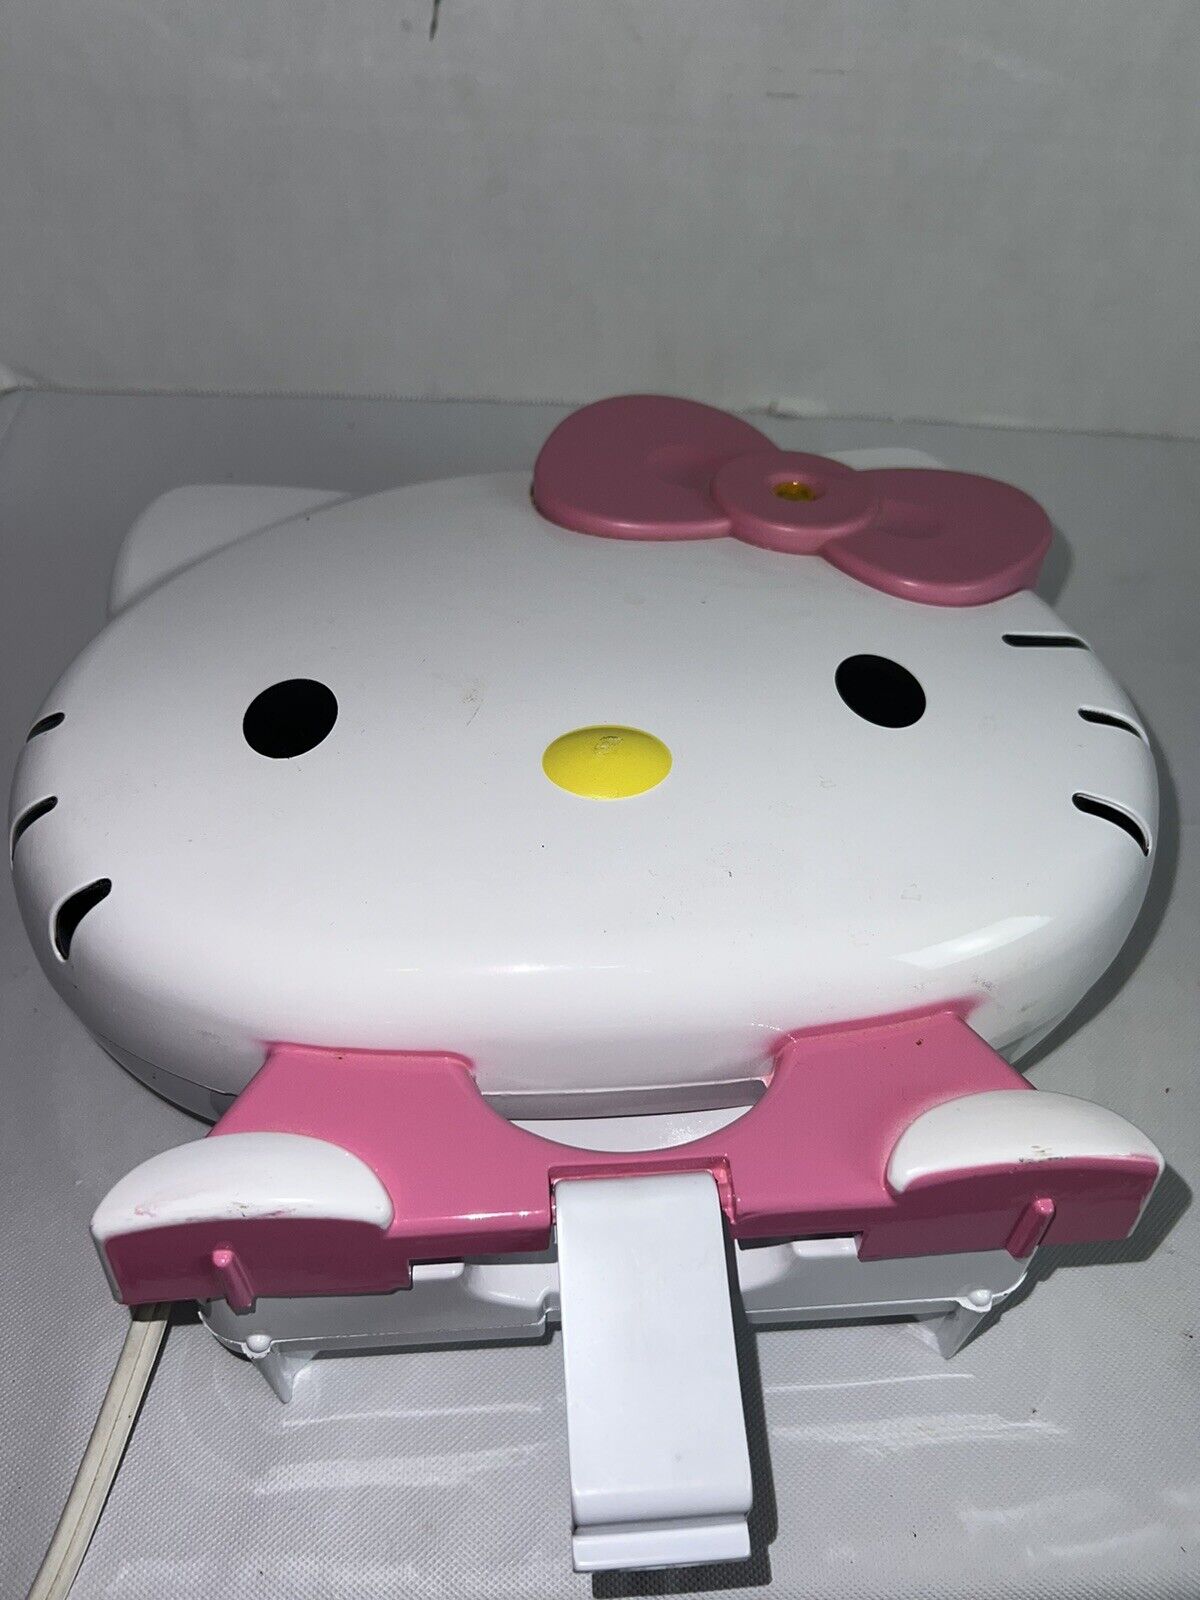 Hello Kitty Cupcake Maker KT5246 Tested Works Non Stick Brownies Dessert